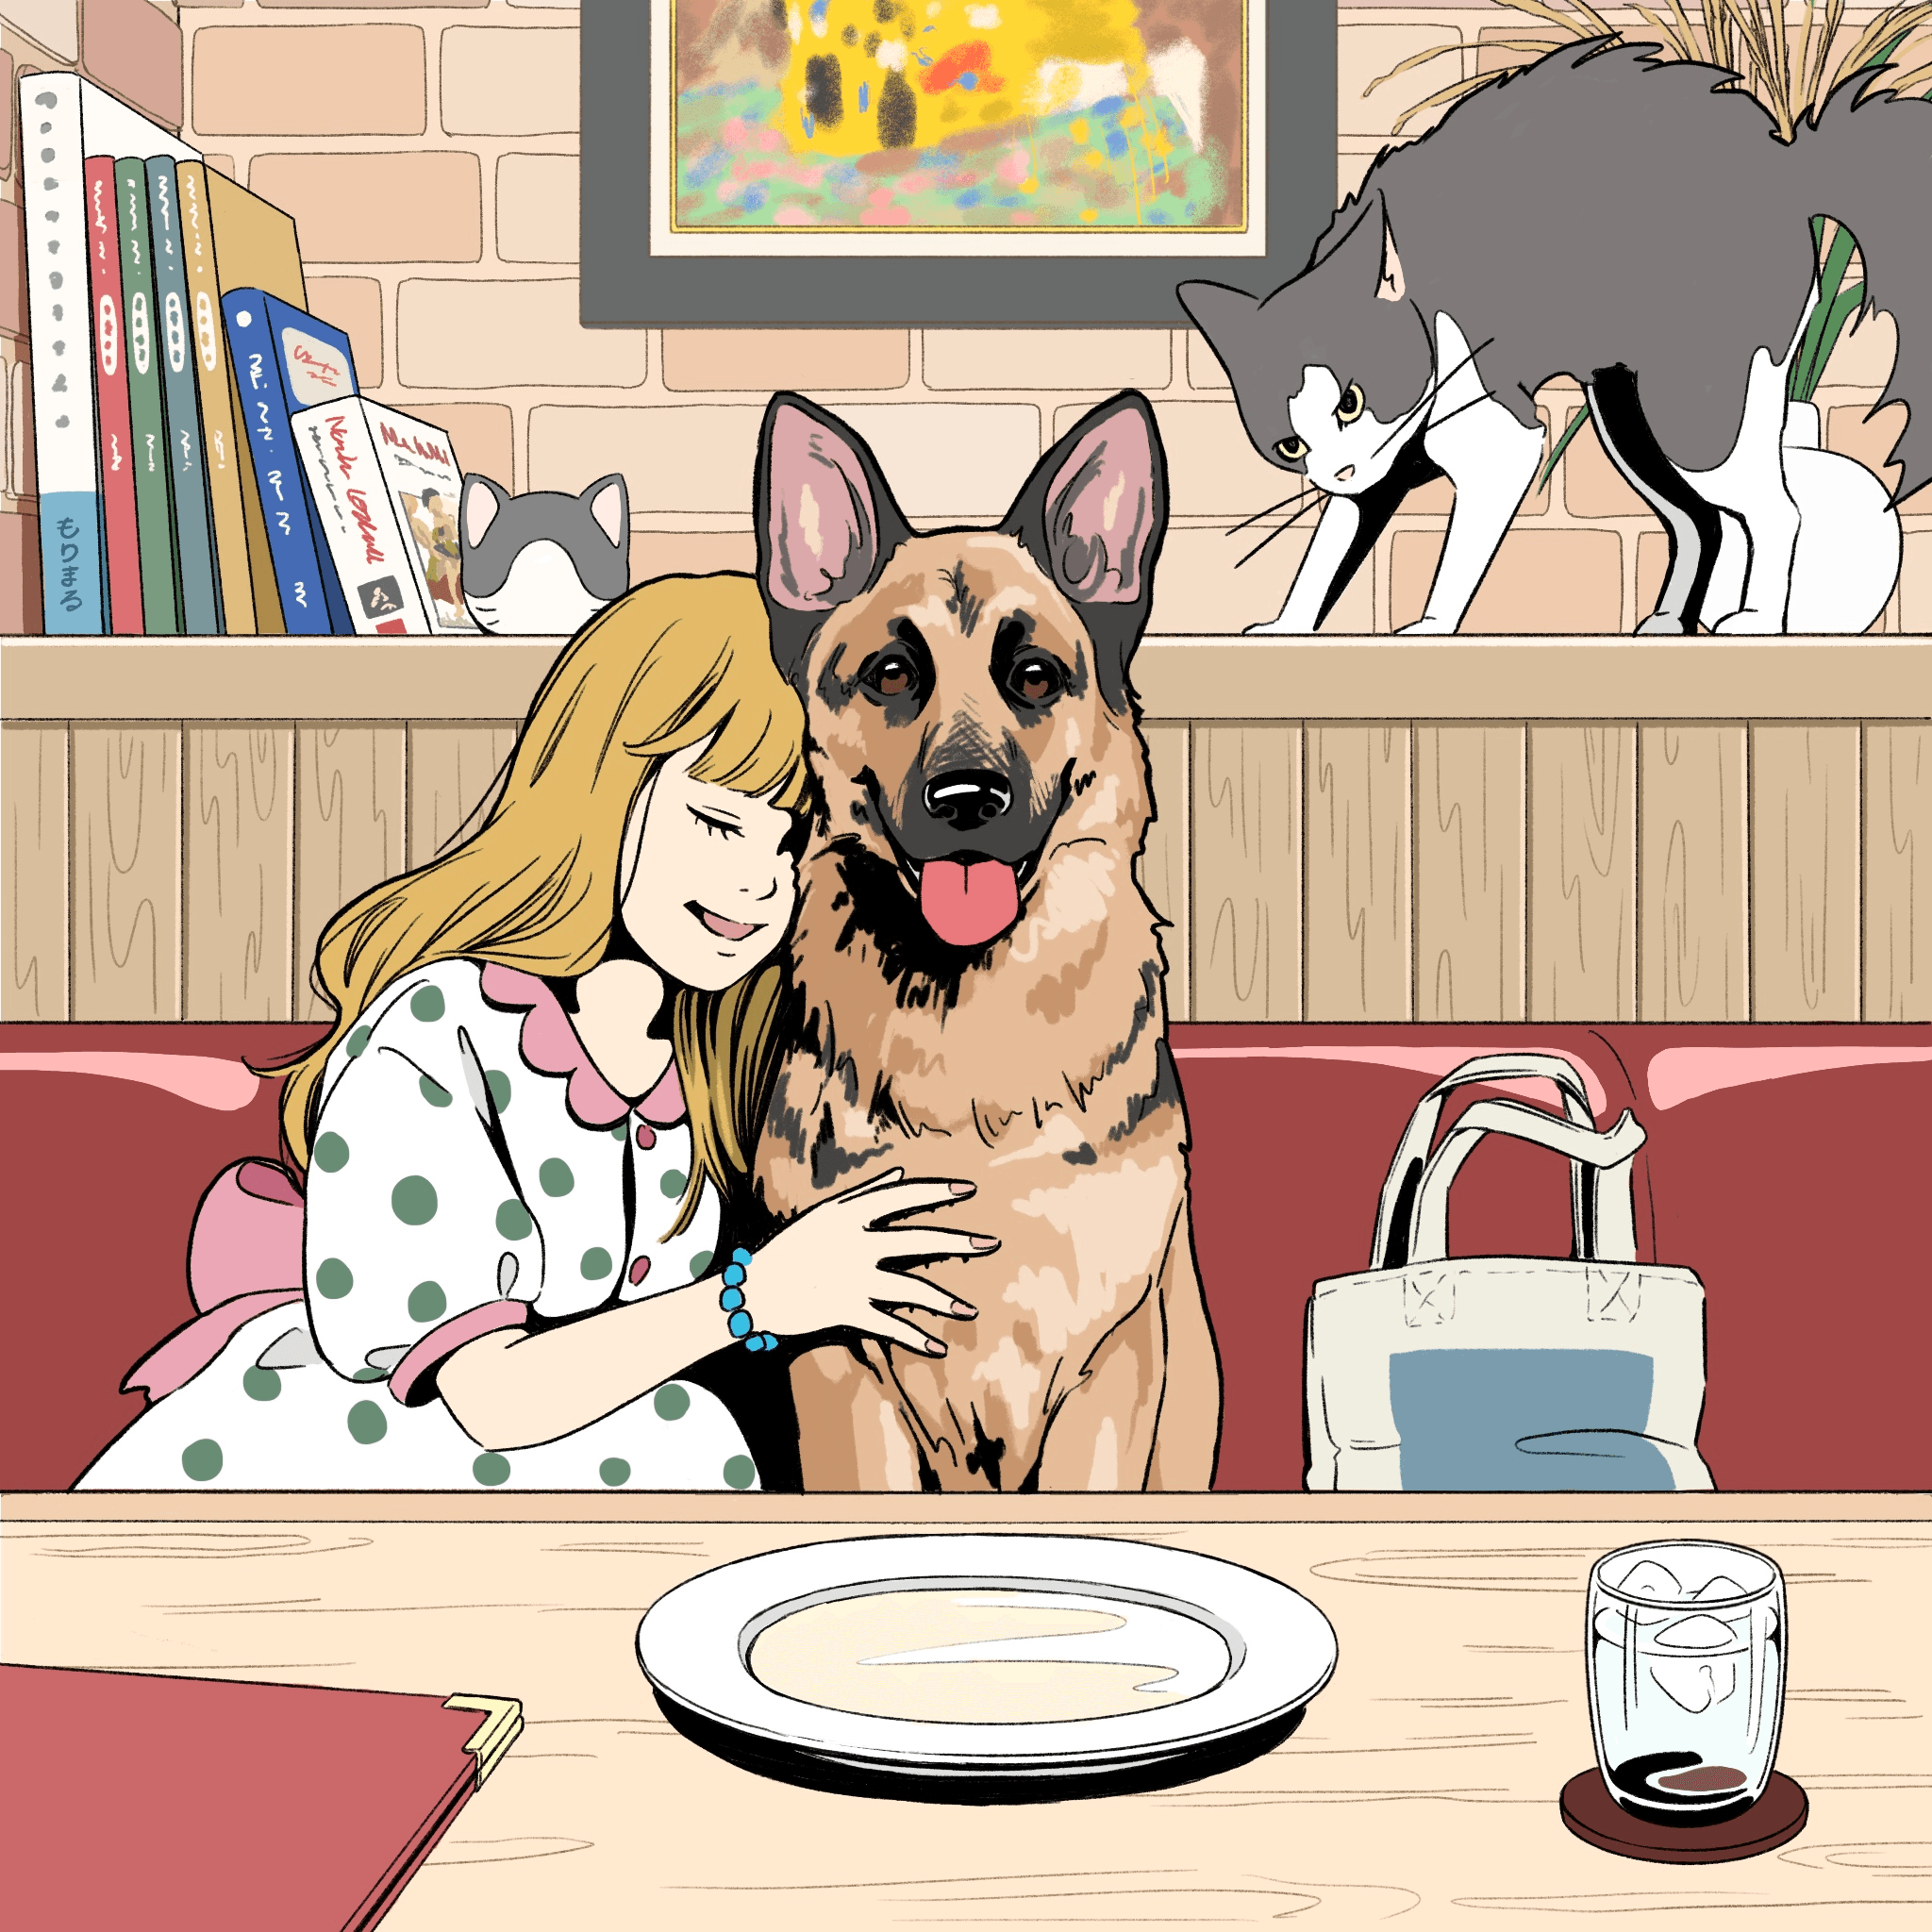 Milk, a German Shepherd came to this cafe